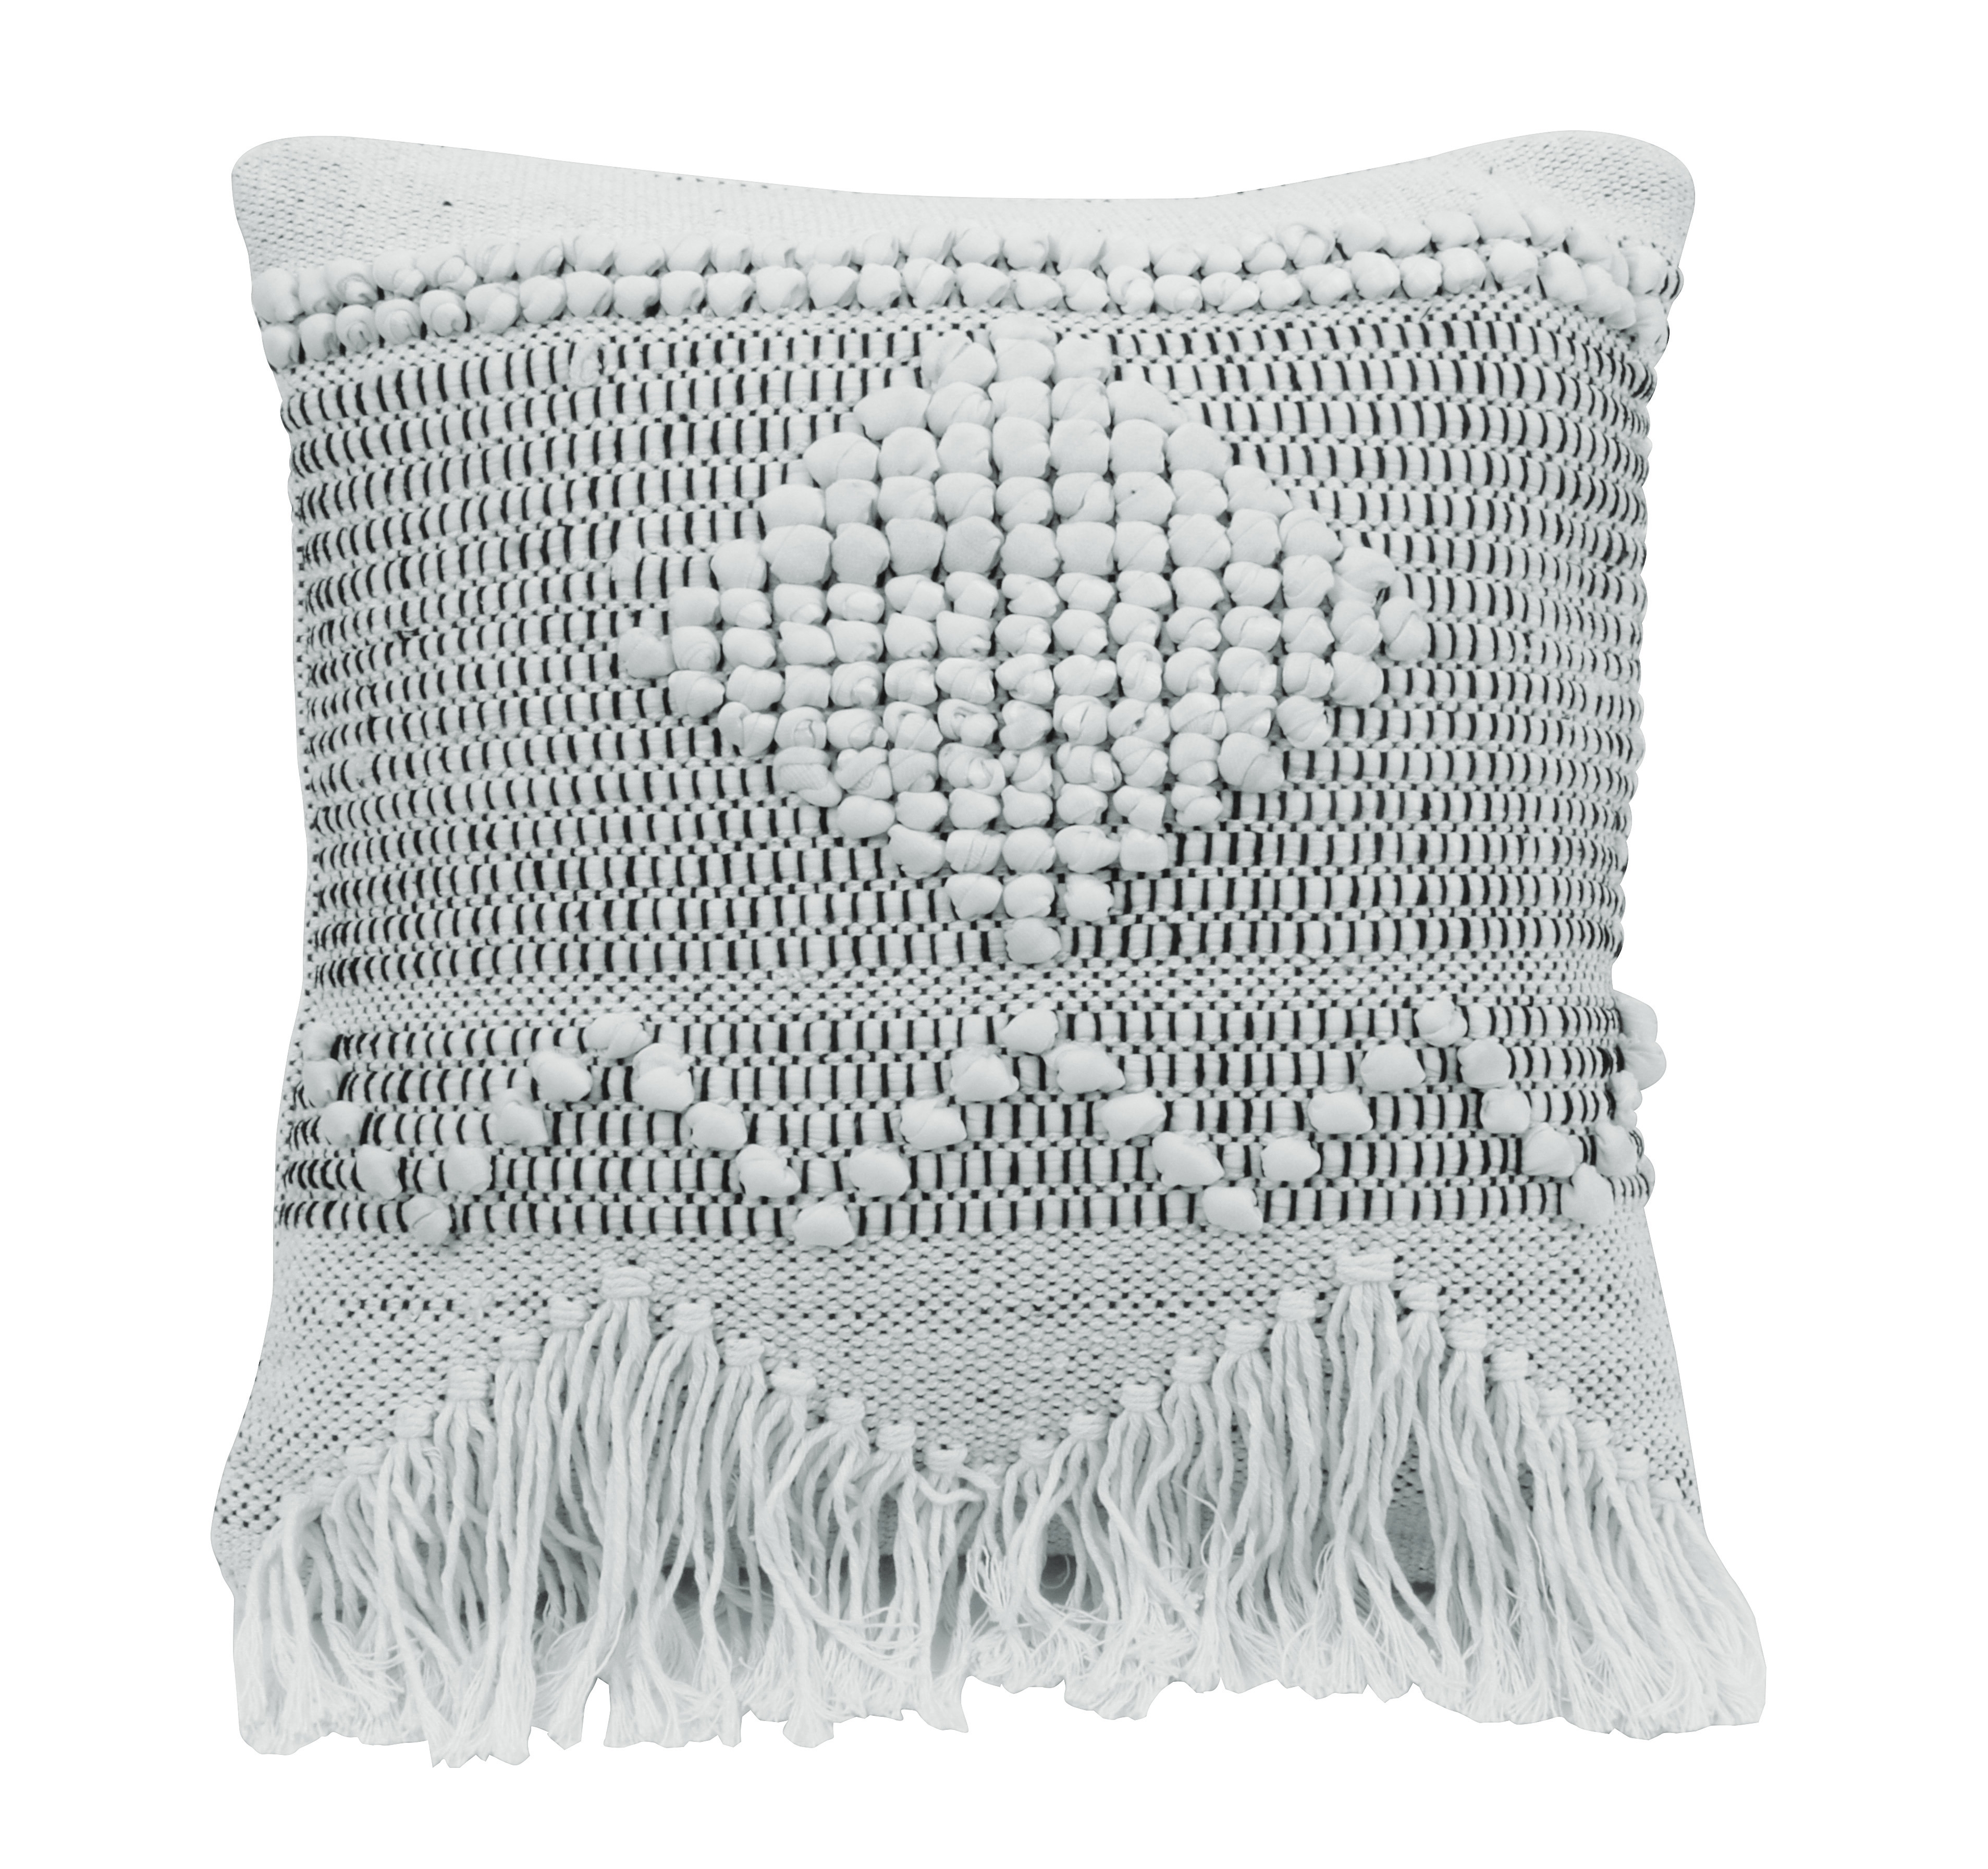 Ivory & Grey Square Textured Cotton Pillow - Image 0